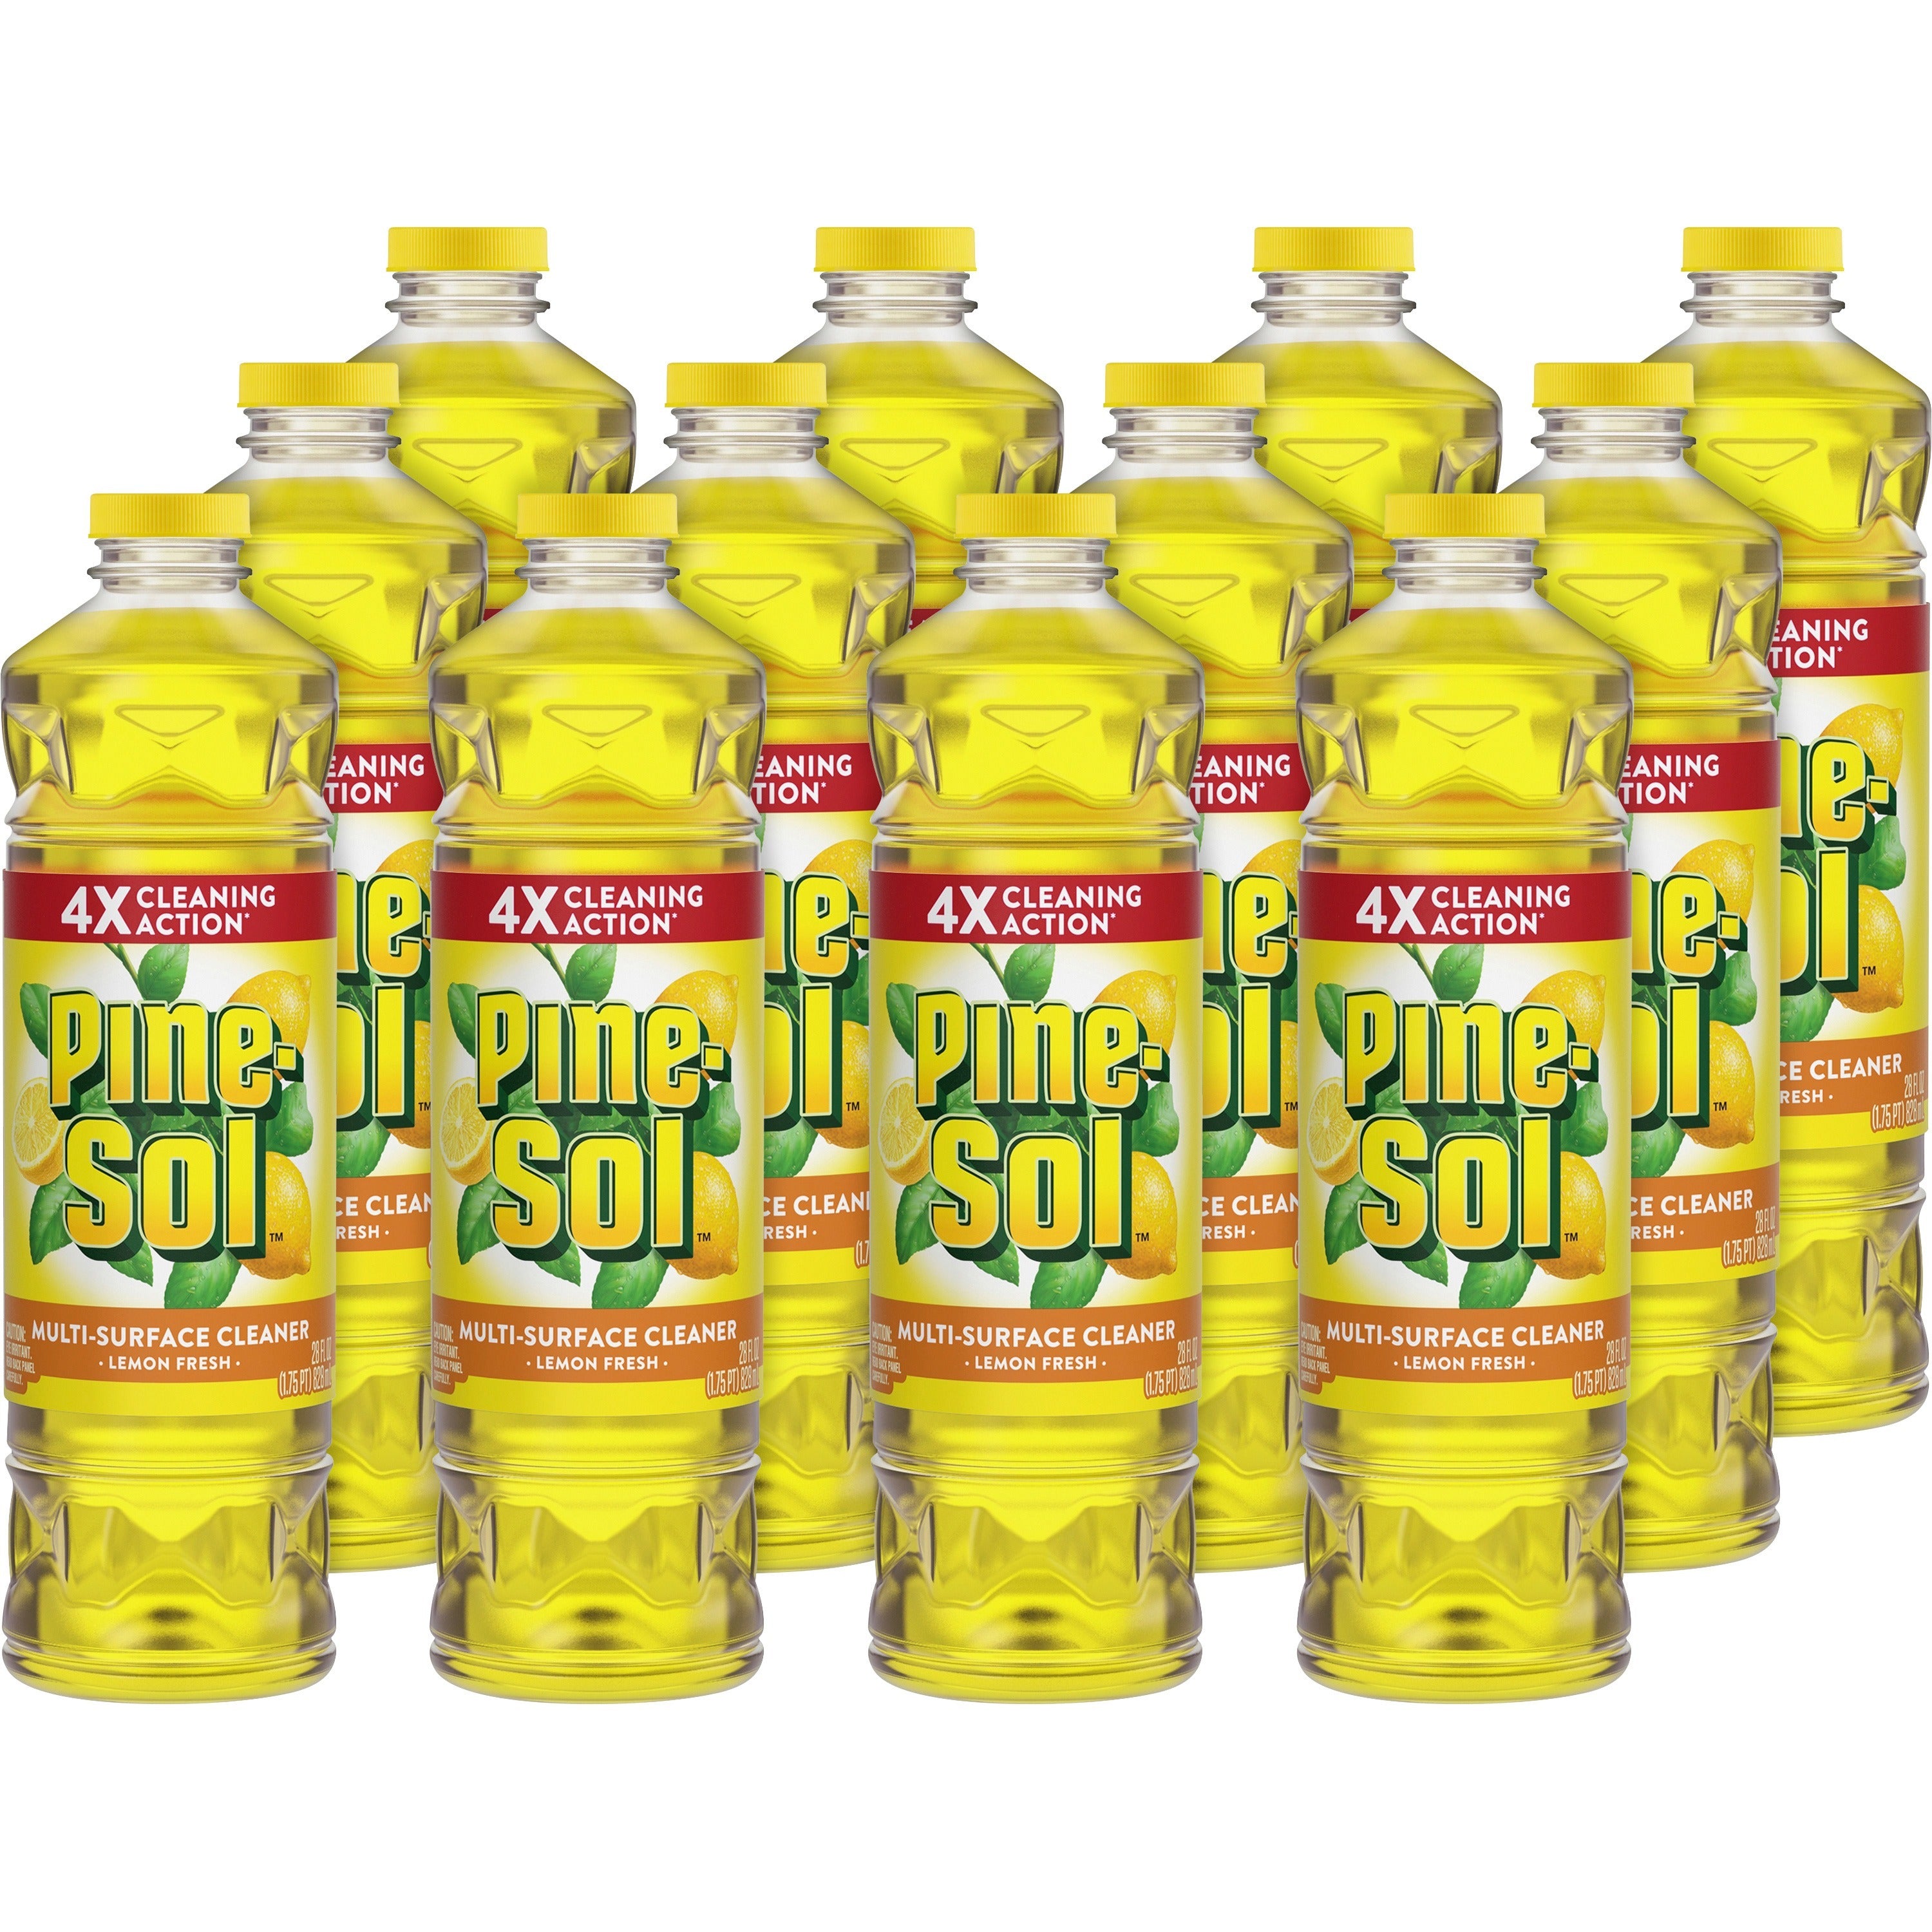 Pine-Sol All Purpose Multi-Surface Cleaner - Concentrate - 28 fl oz (0.9 quart) - Lemon Fresh Scent - 12 / Carton - Deodorize, Long Lasting, Non-sticky, Rinse-free, Disinfectant - Yellow - 1